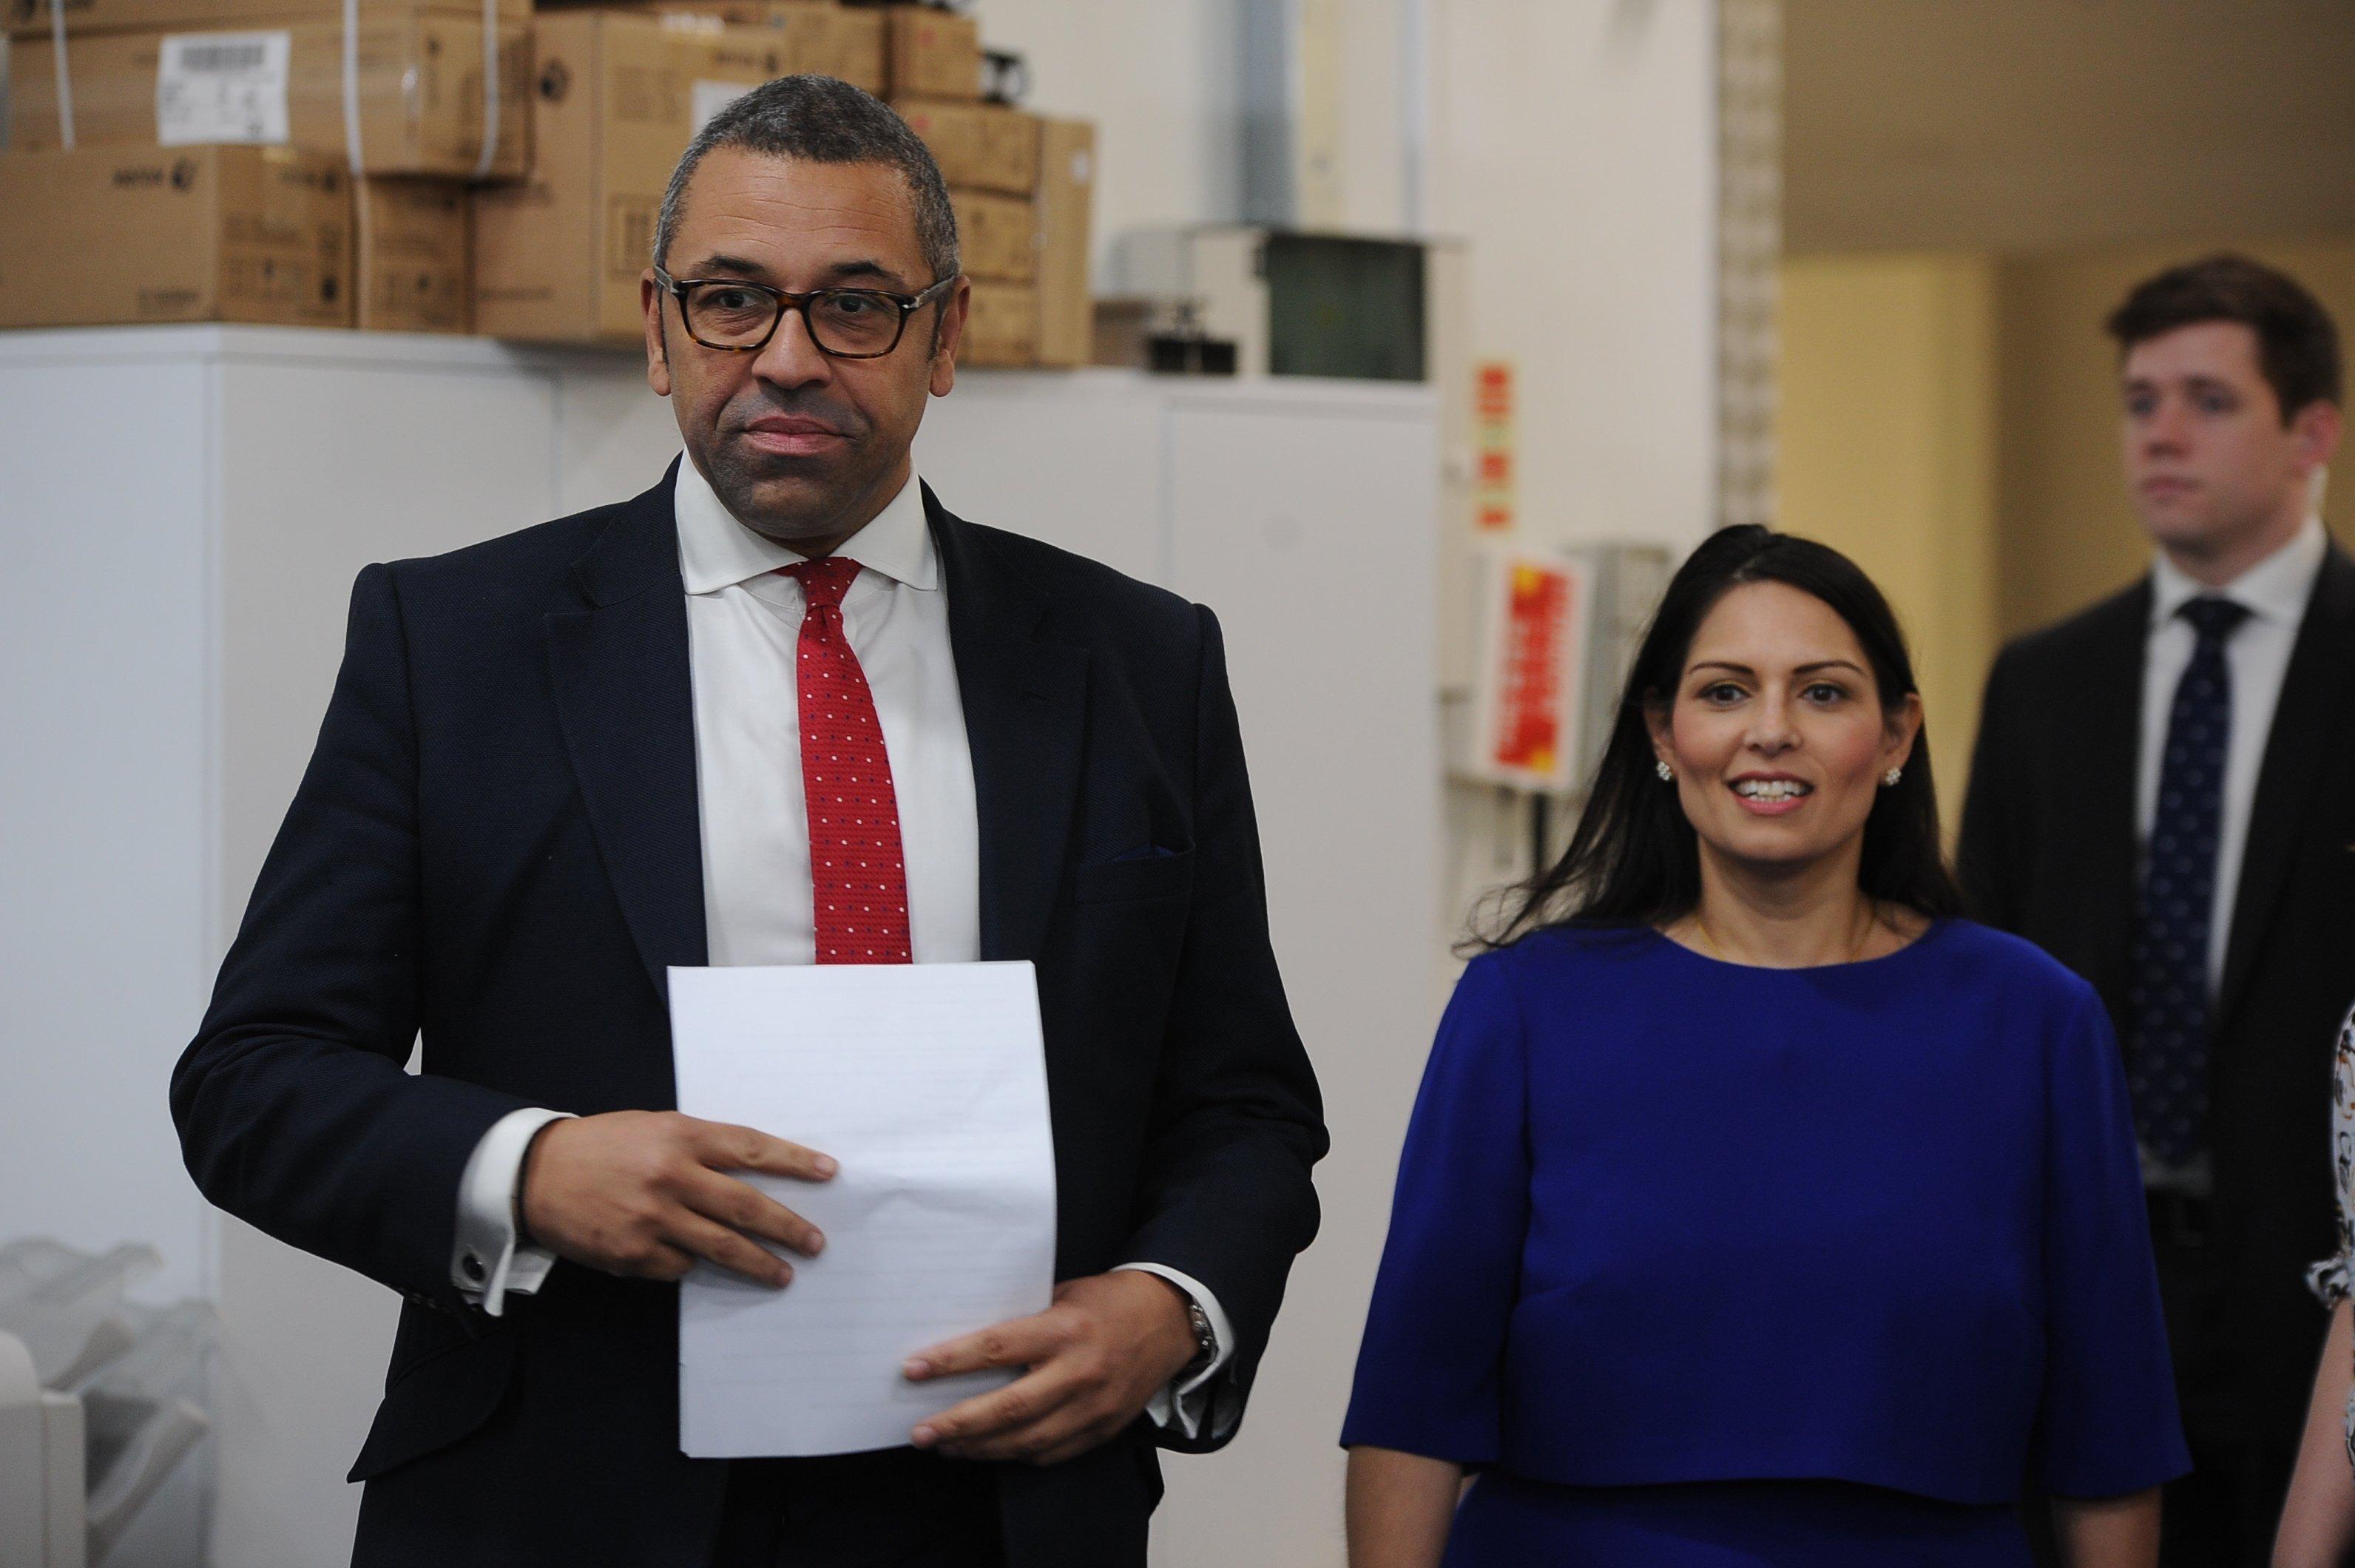 James Cleverly and Priti Patel